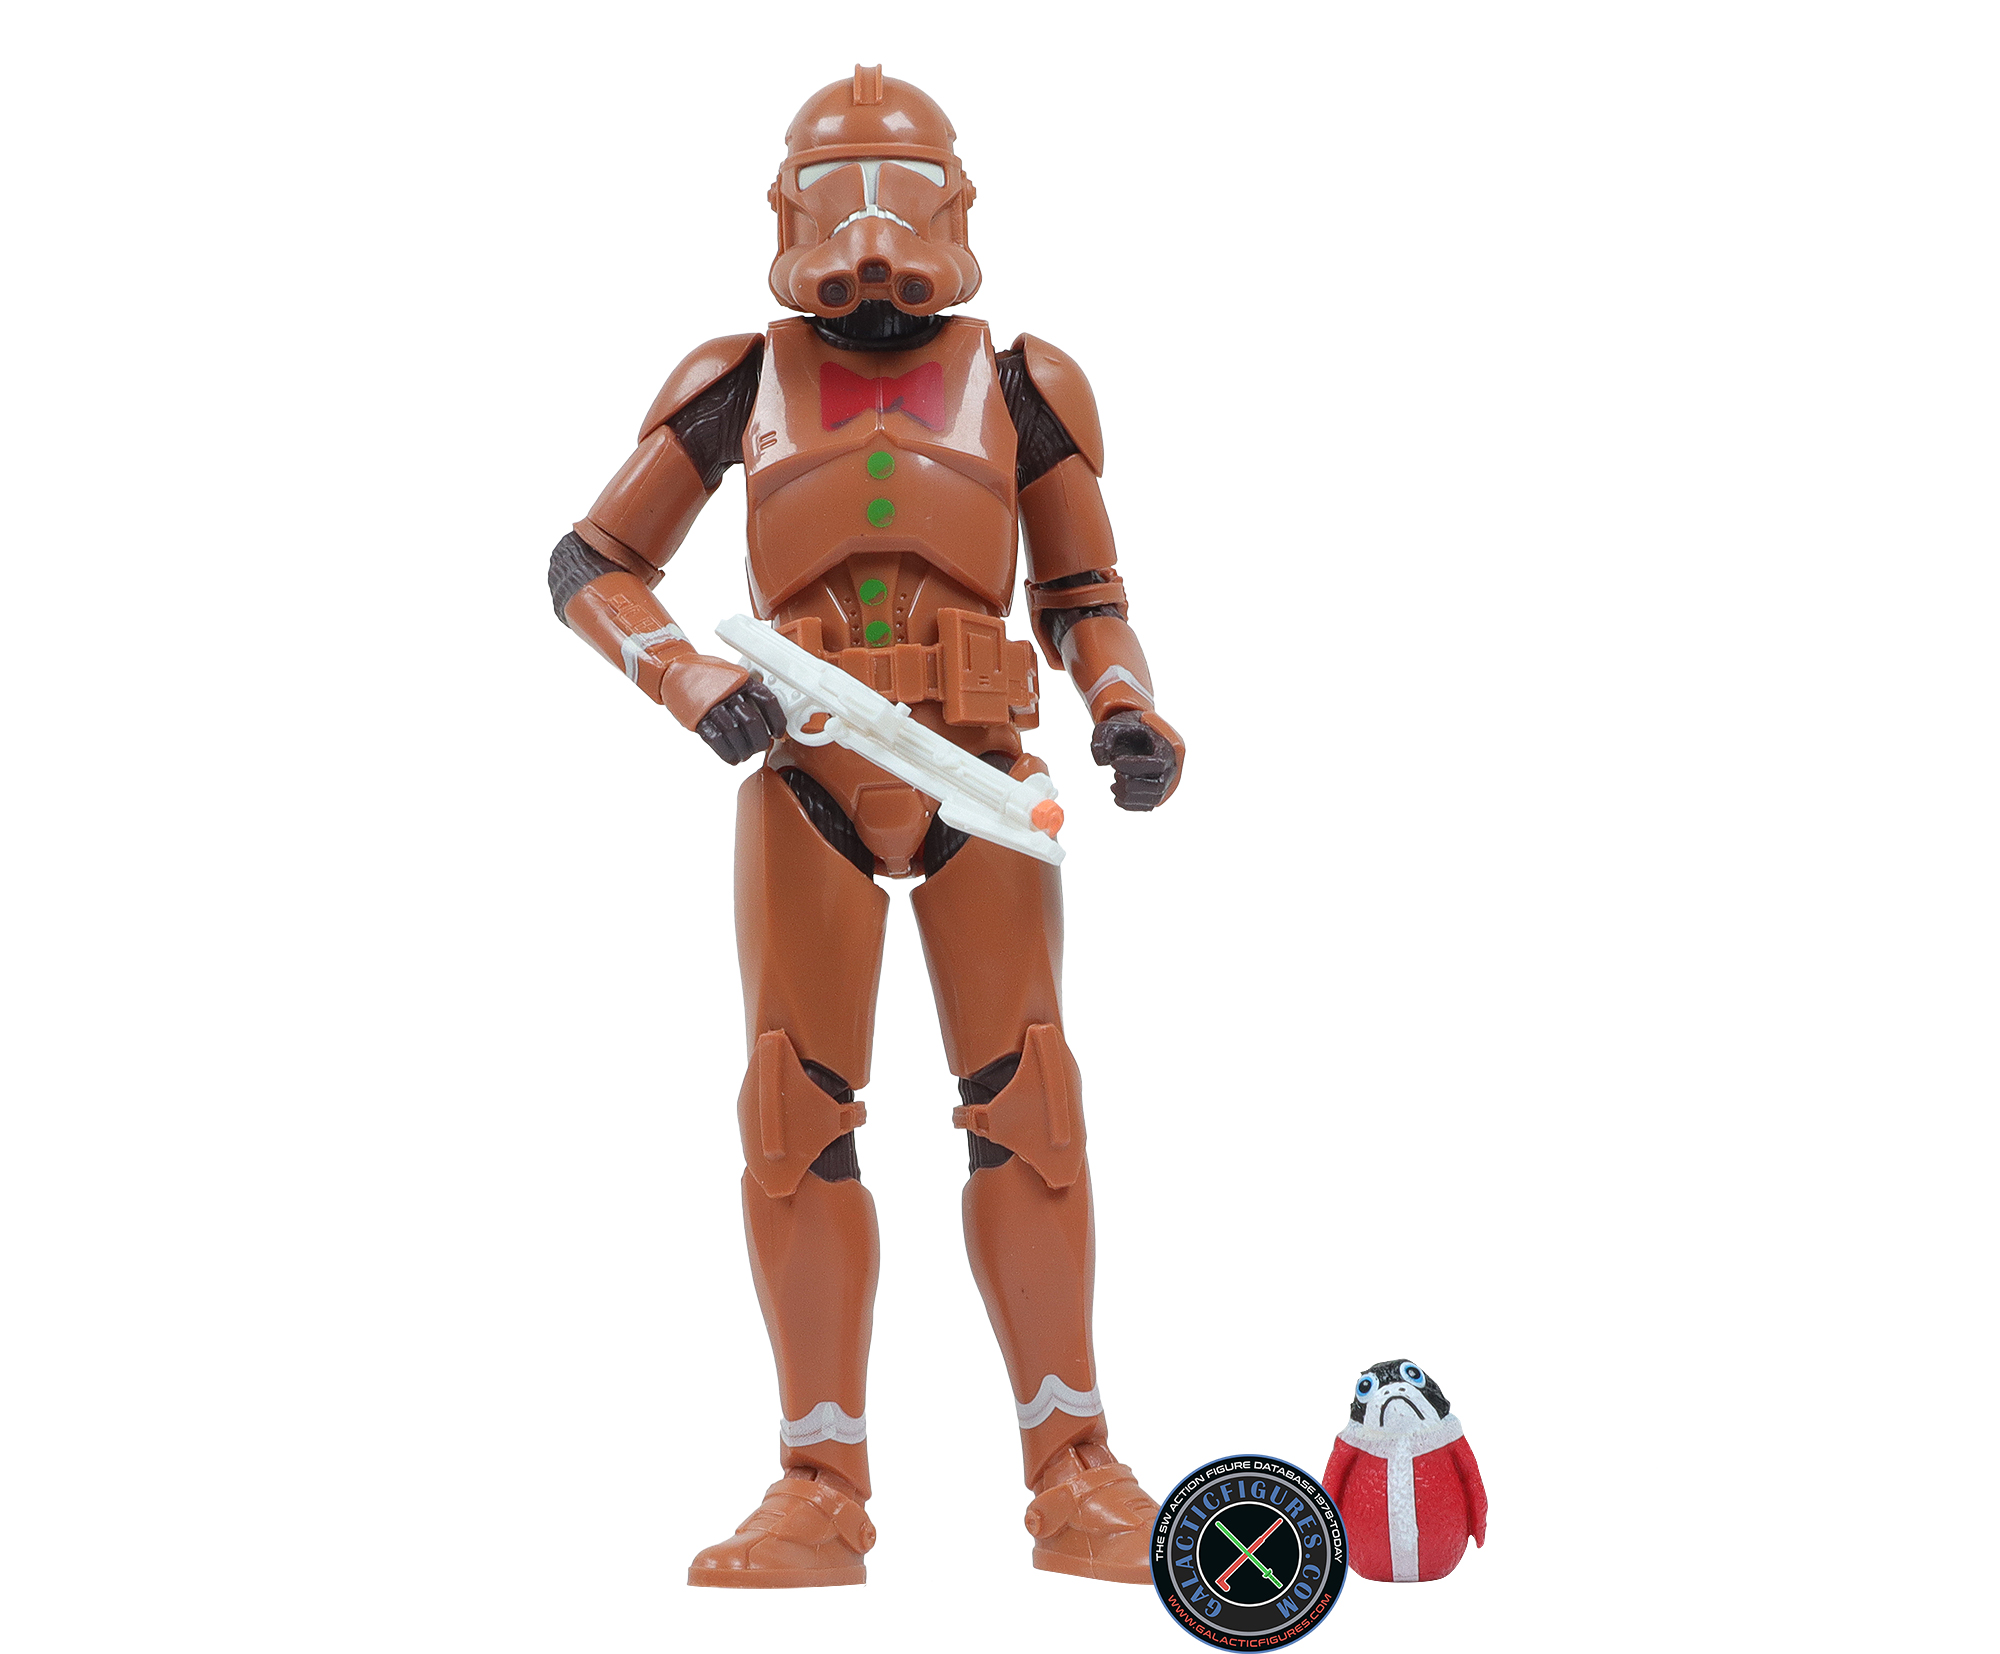 Clone Trooper 2022 Holiday Edition 2-Pack #5 of 6